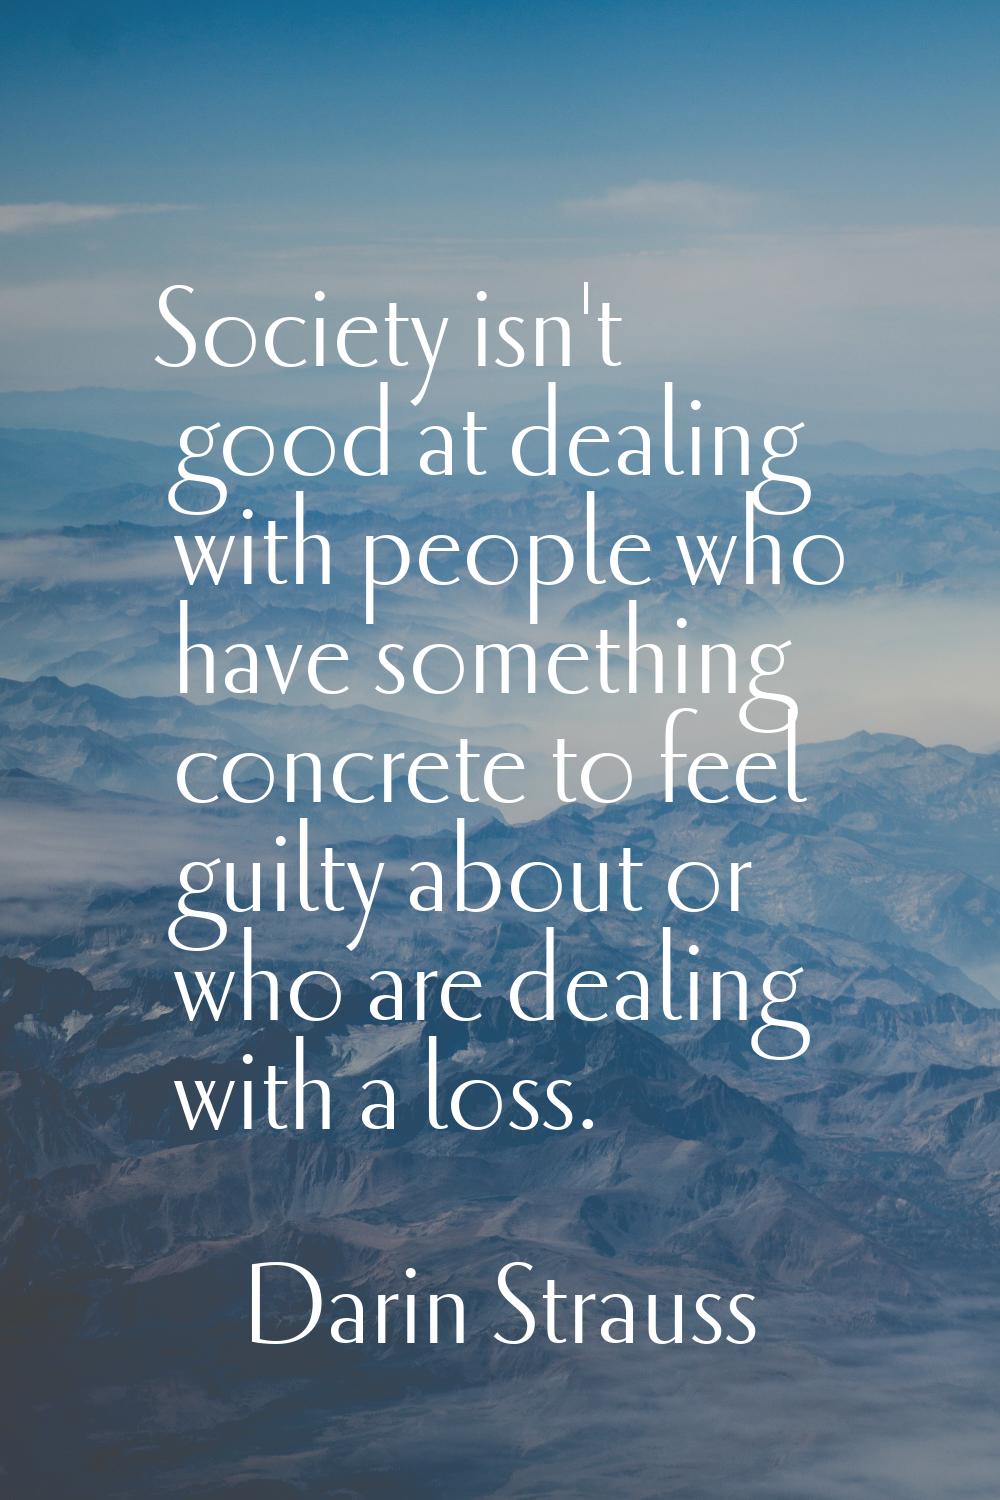 Society isn't good at dealing with people who have something concrete to feel guilty about or who a